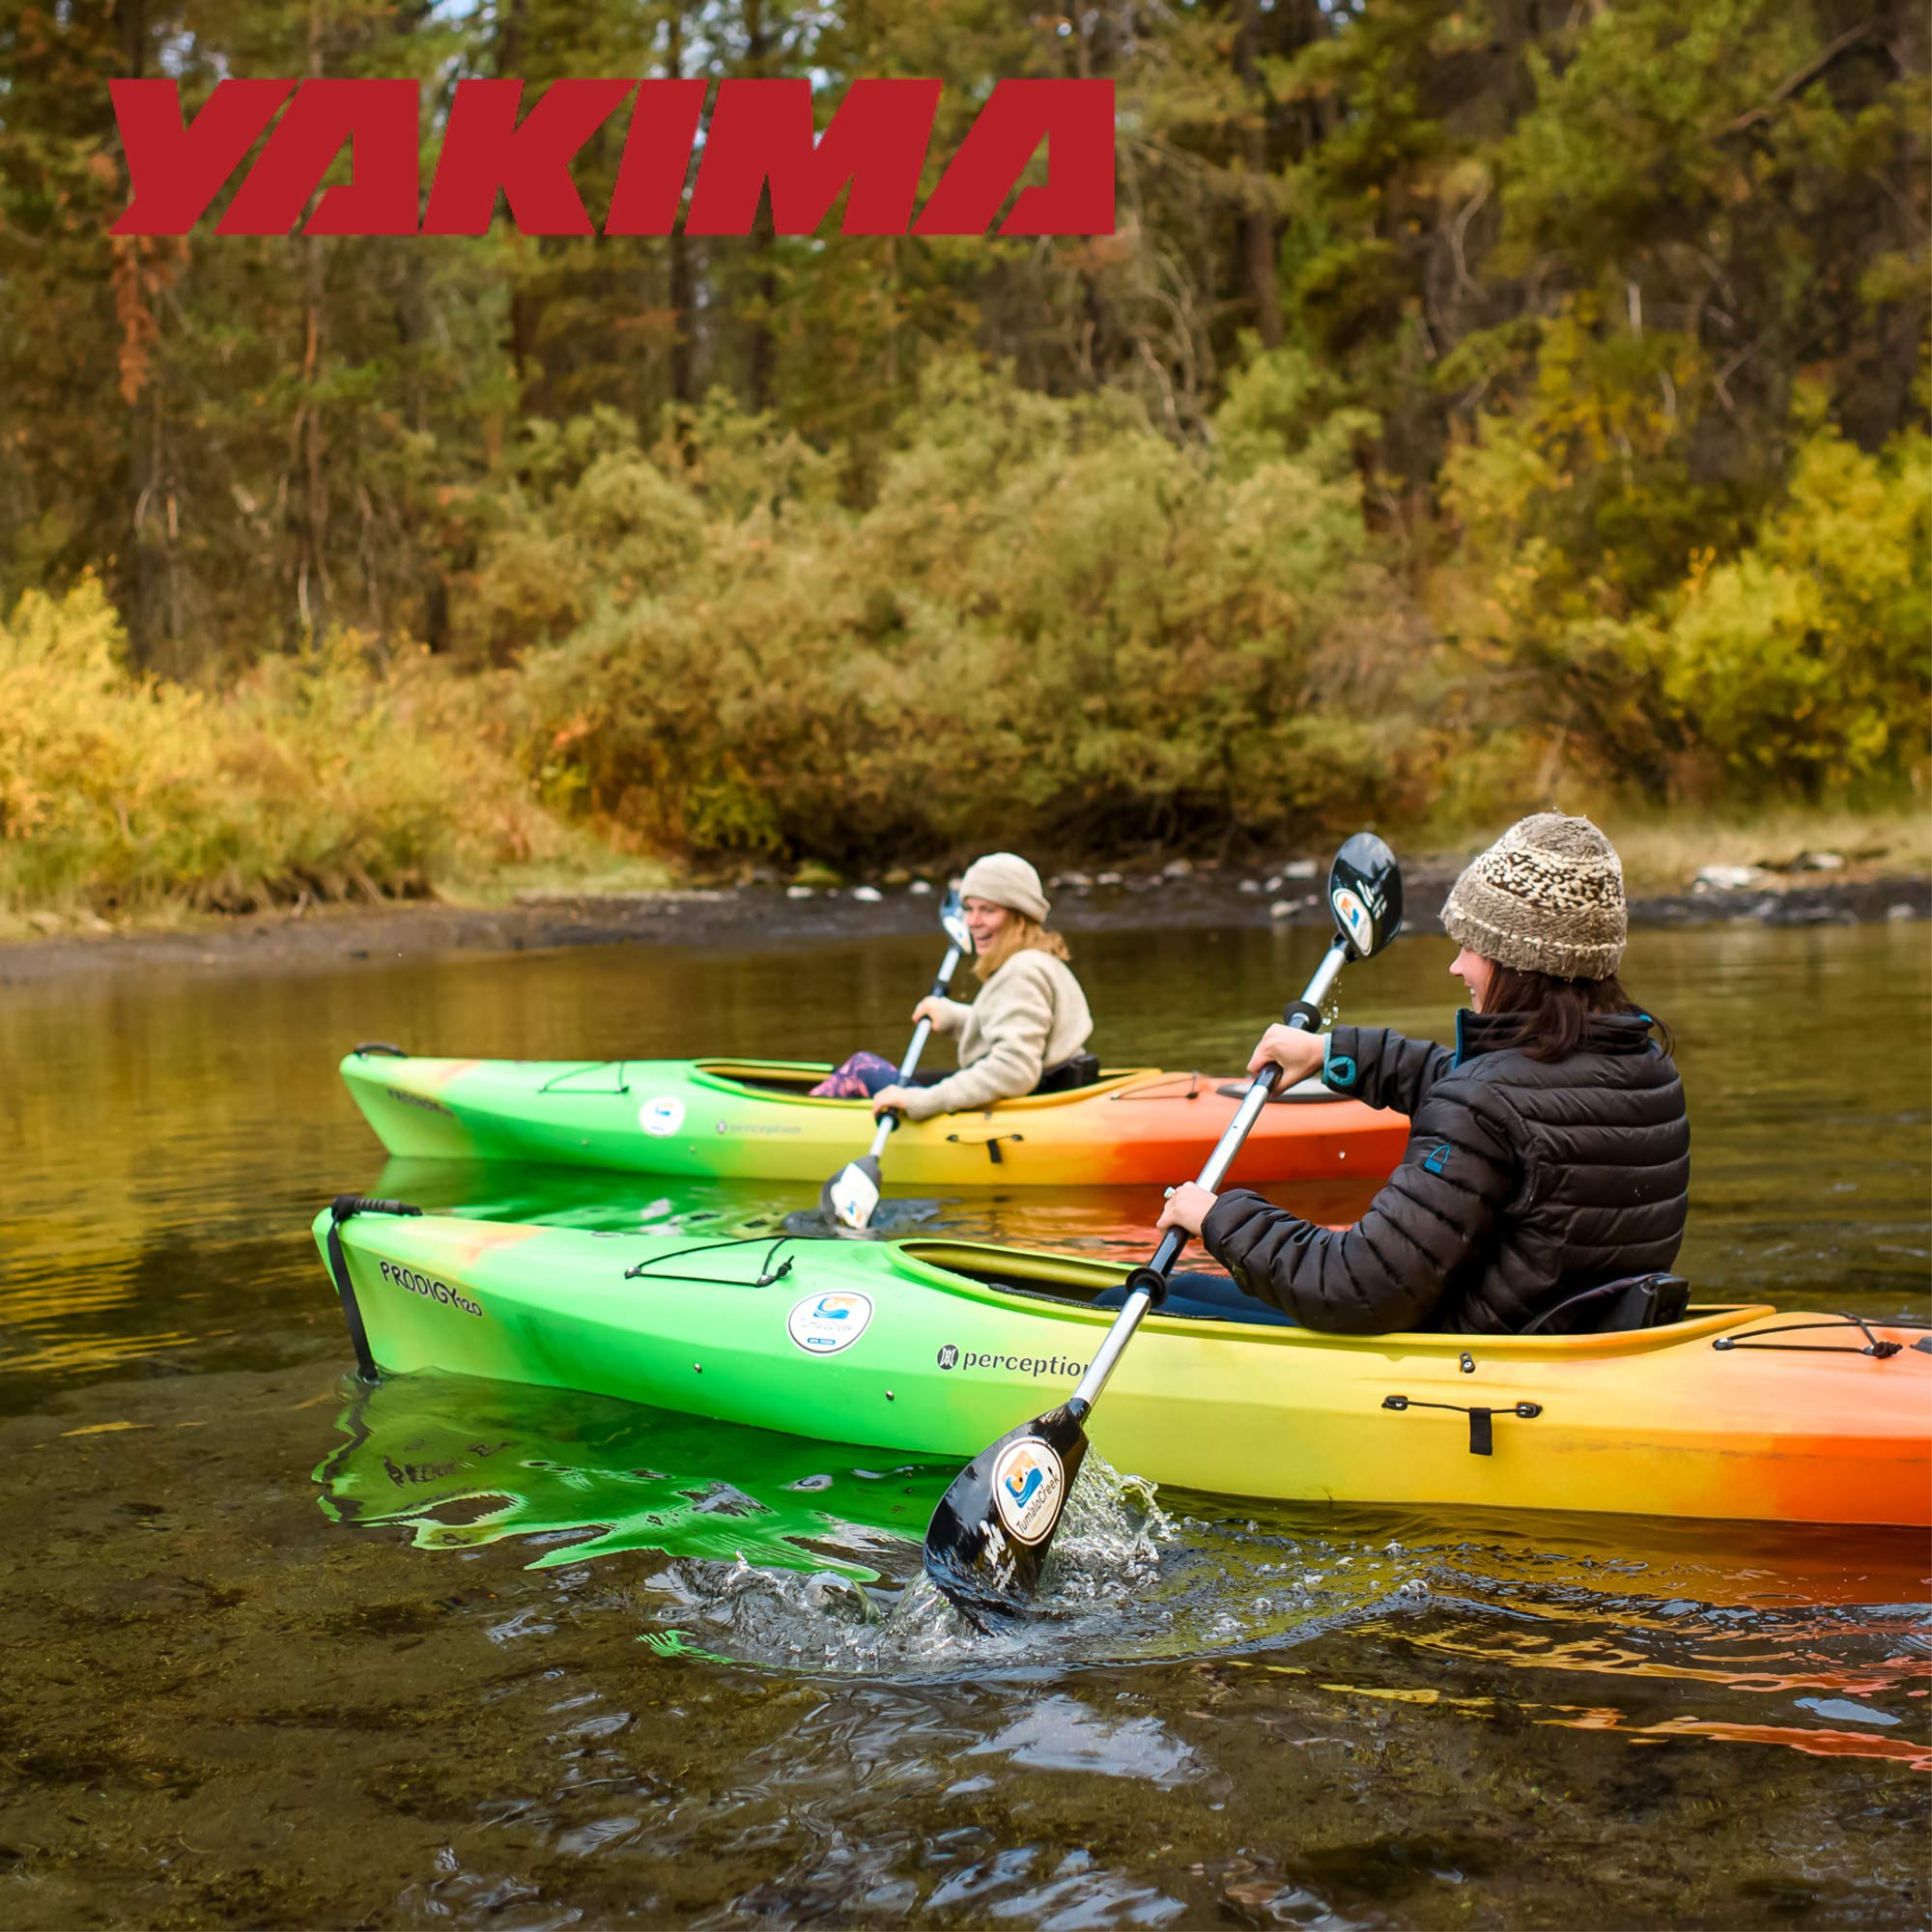 Yakima JayLow 2 Kayak Vertically Mounted or 1 Kayak J Cradle Vehicle Rooftop Mounted Rack with Heavy Duty Straps, Bow and Stern Tie Downs, Black